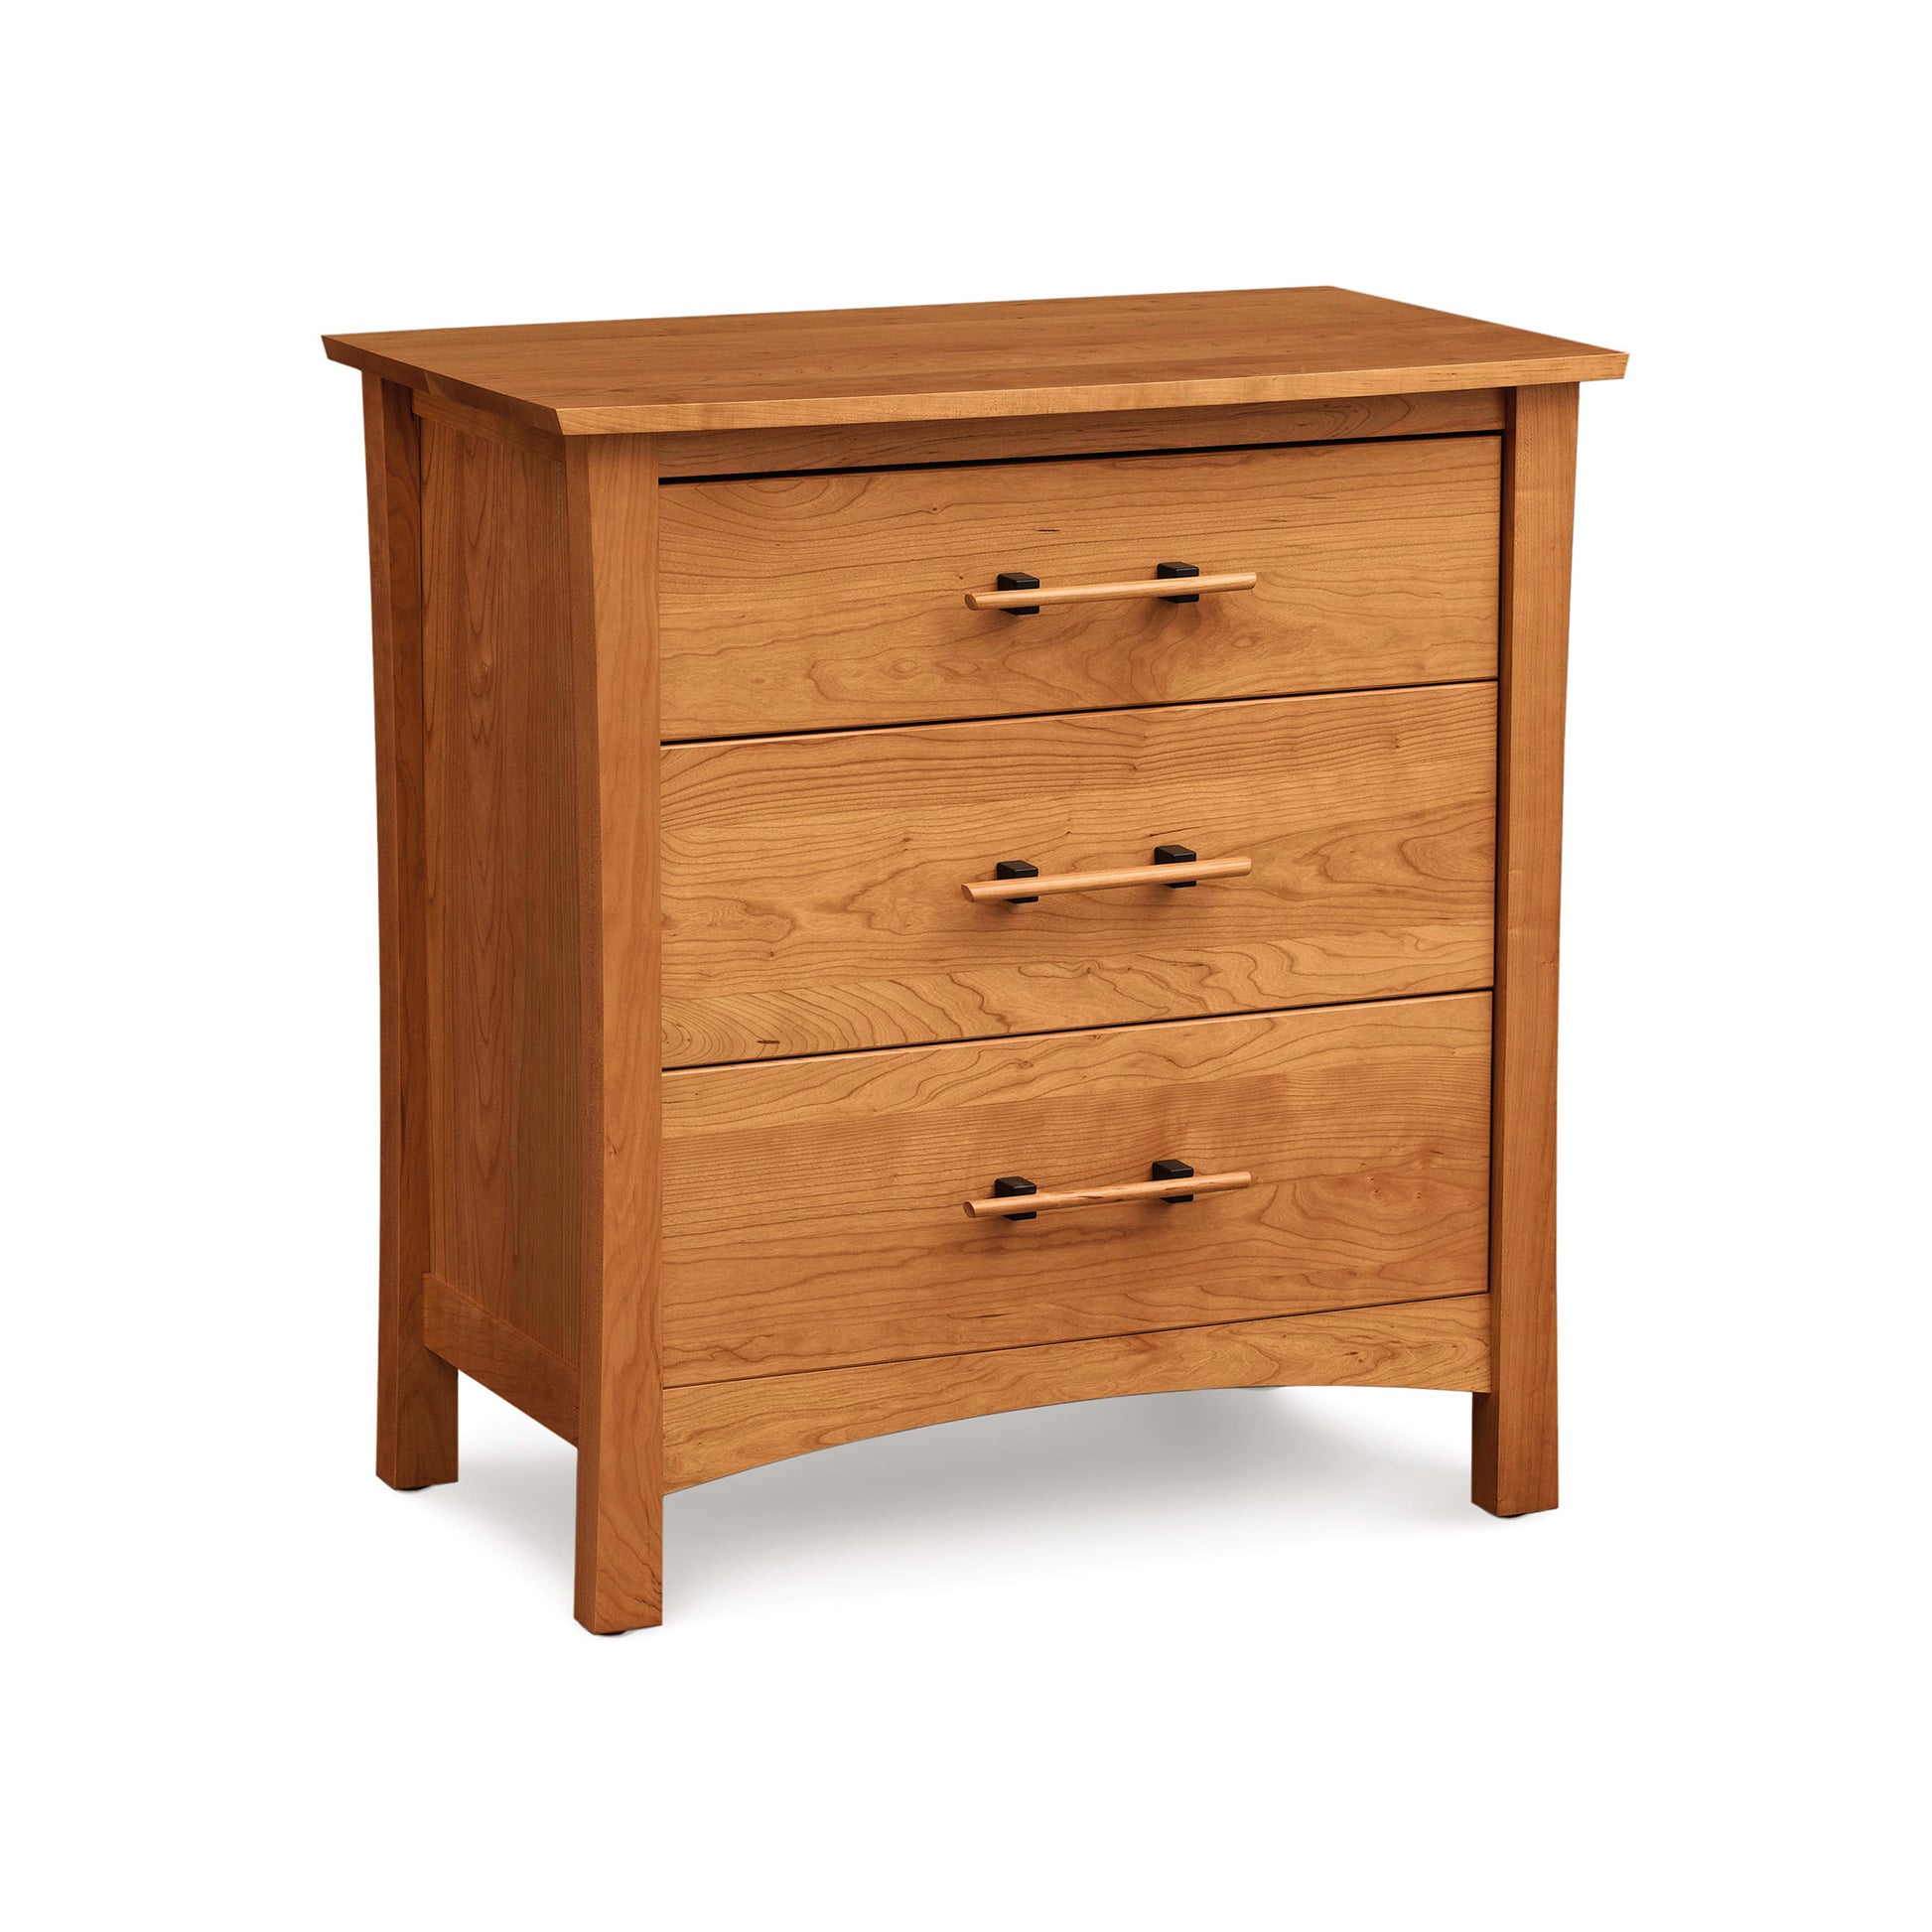 A cherry wood Copeland Furniture Monterey 3-Drawer Chest isolated on a white background.